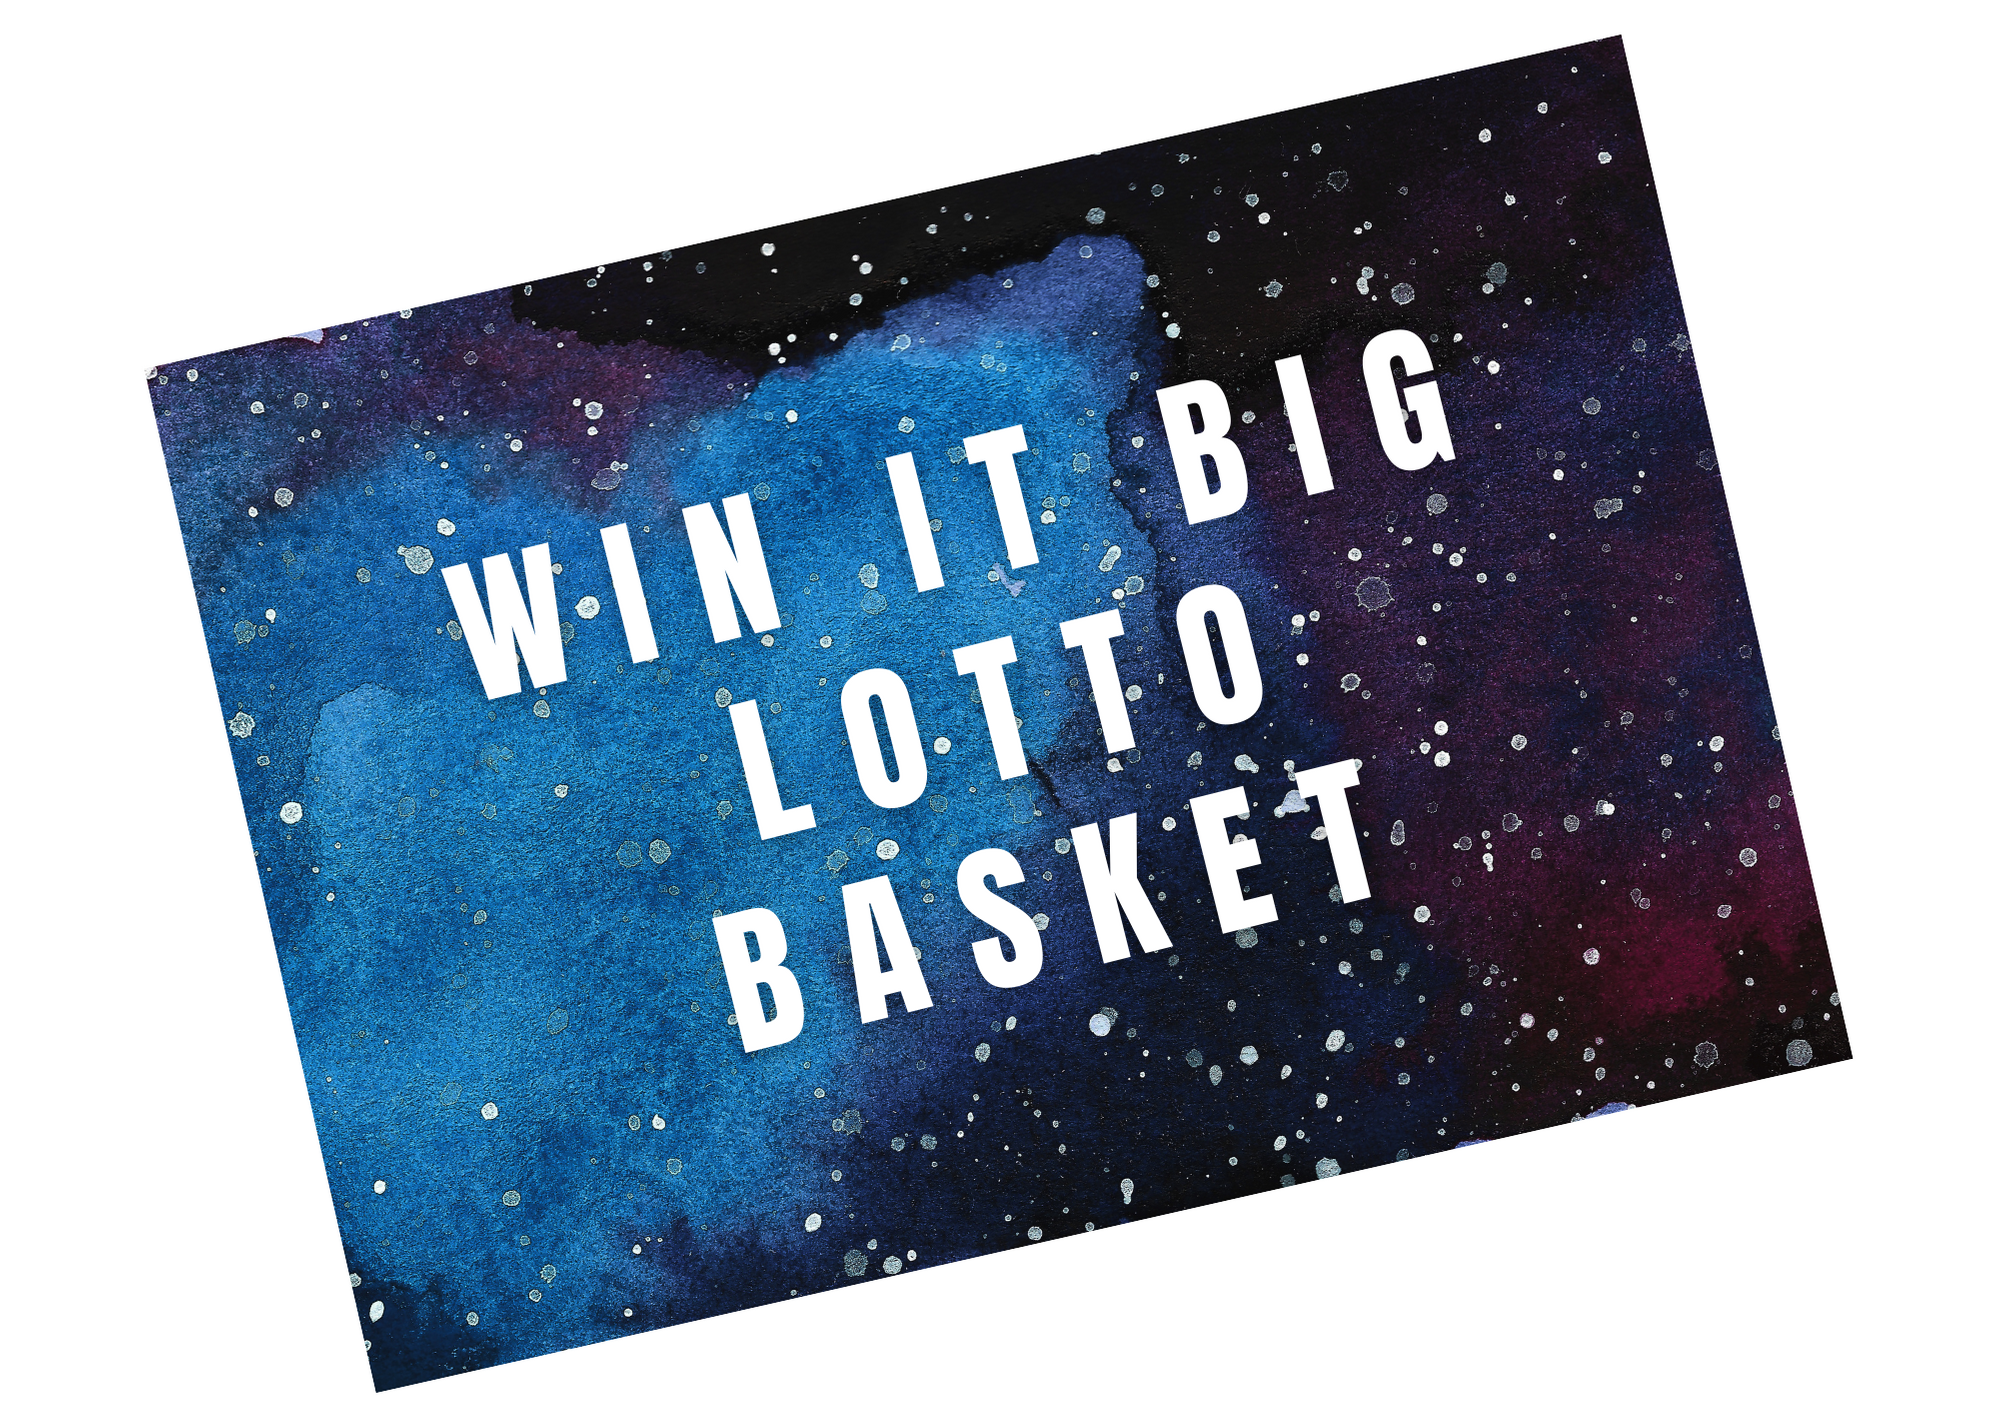 Copy of Win it big lotto package.png